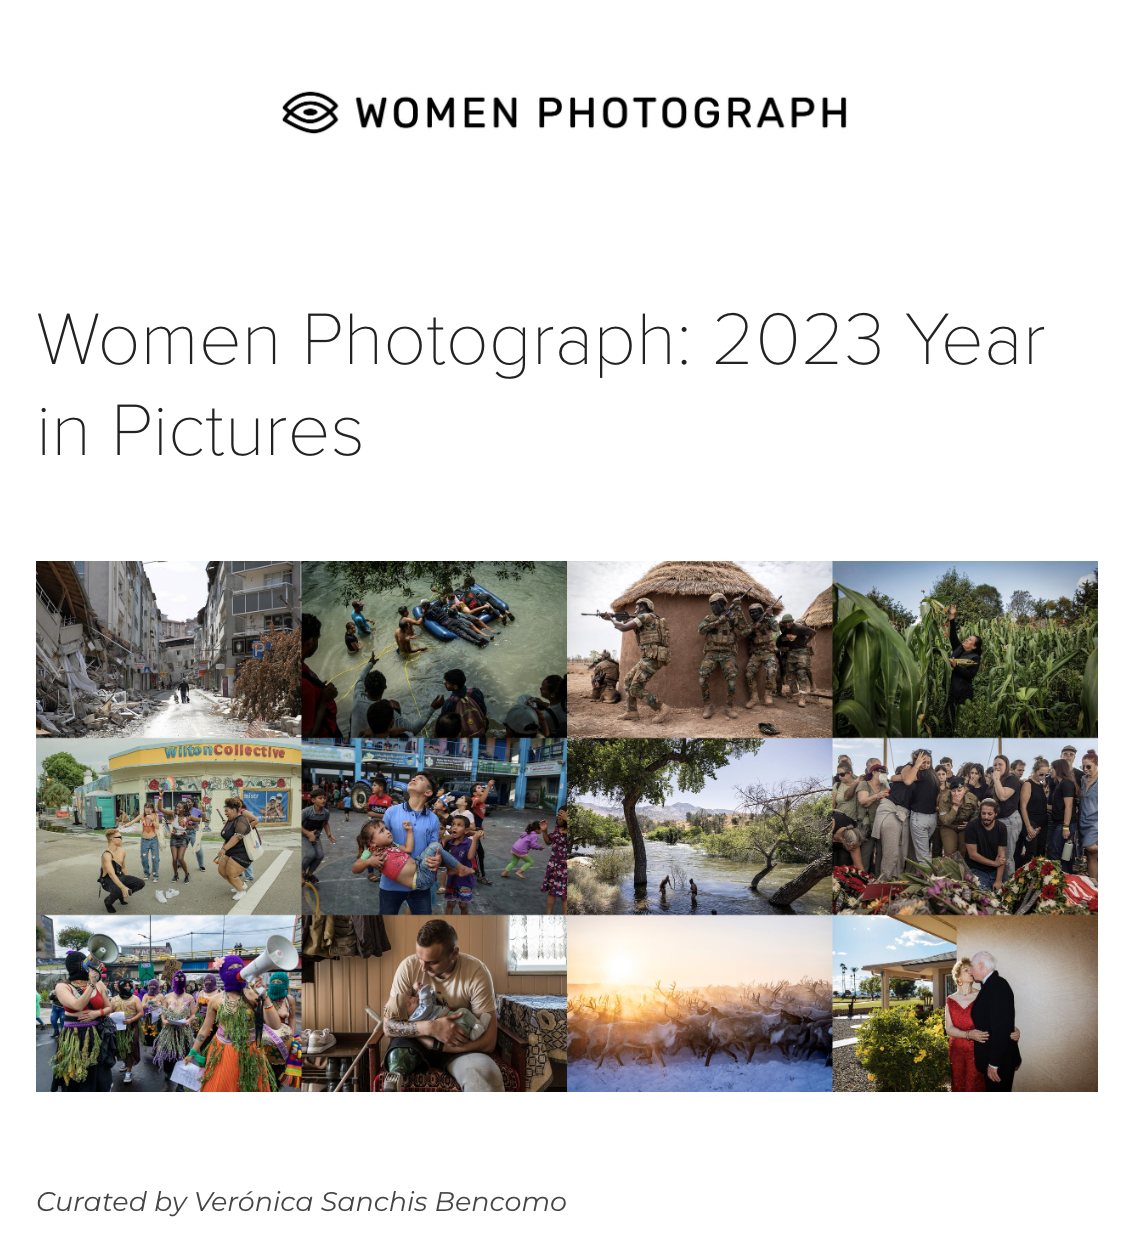 Women Photograph - 2023 Year in Pictures